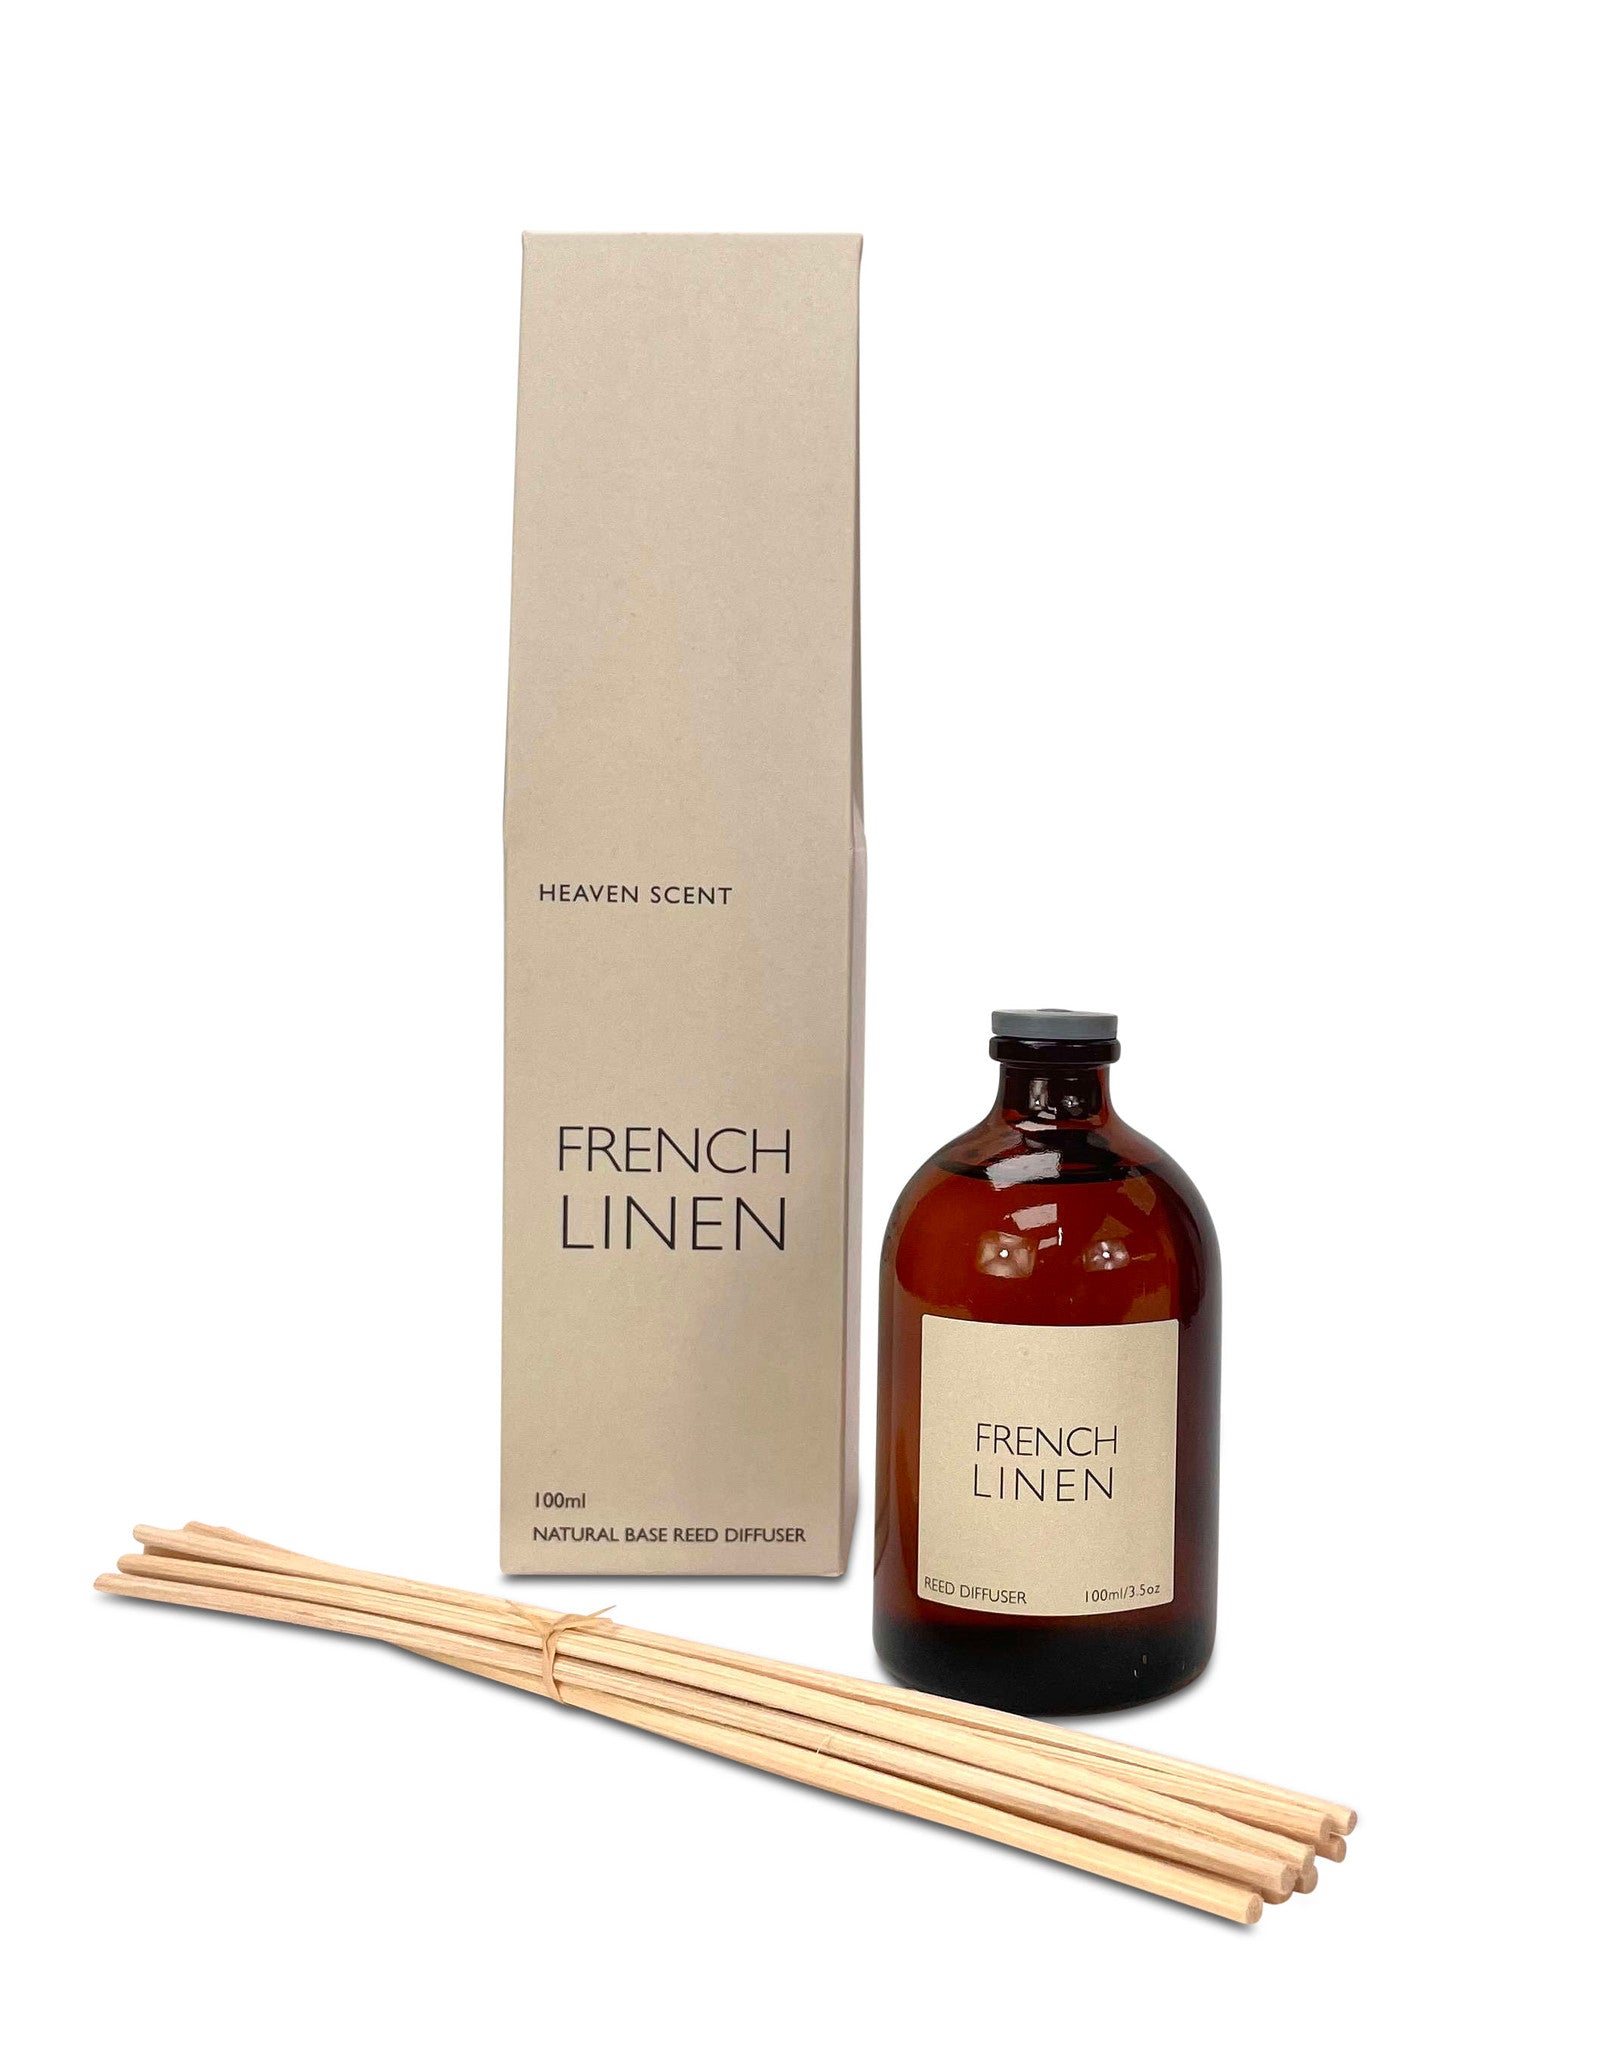 French Linen reed diffuser with notes of freshly laundered linens drying in a summer breeze, tranquil notes amber, cotton flower, sun dried vanilla bean with citrus peel and white cedar.  